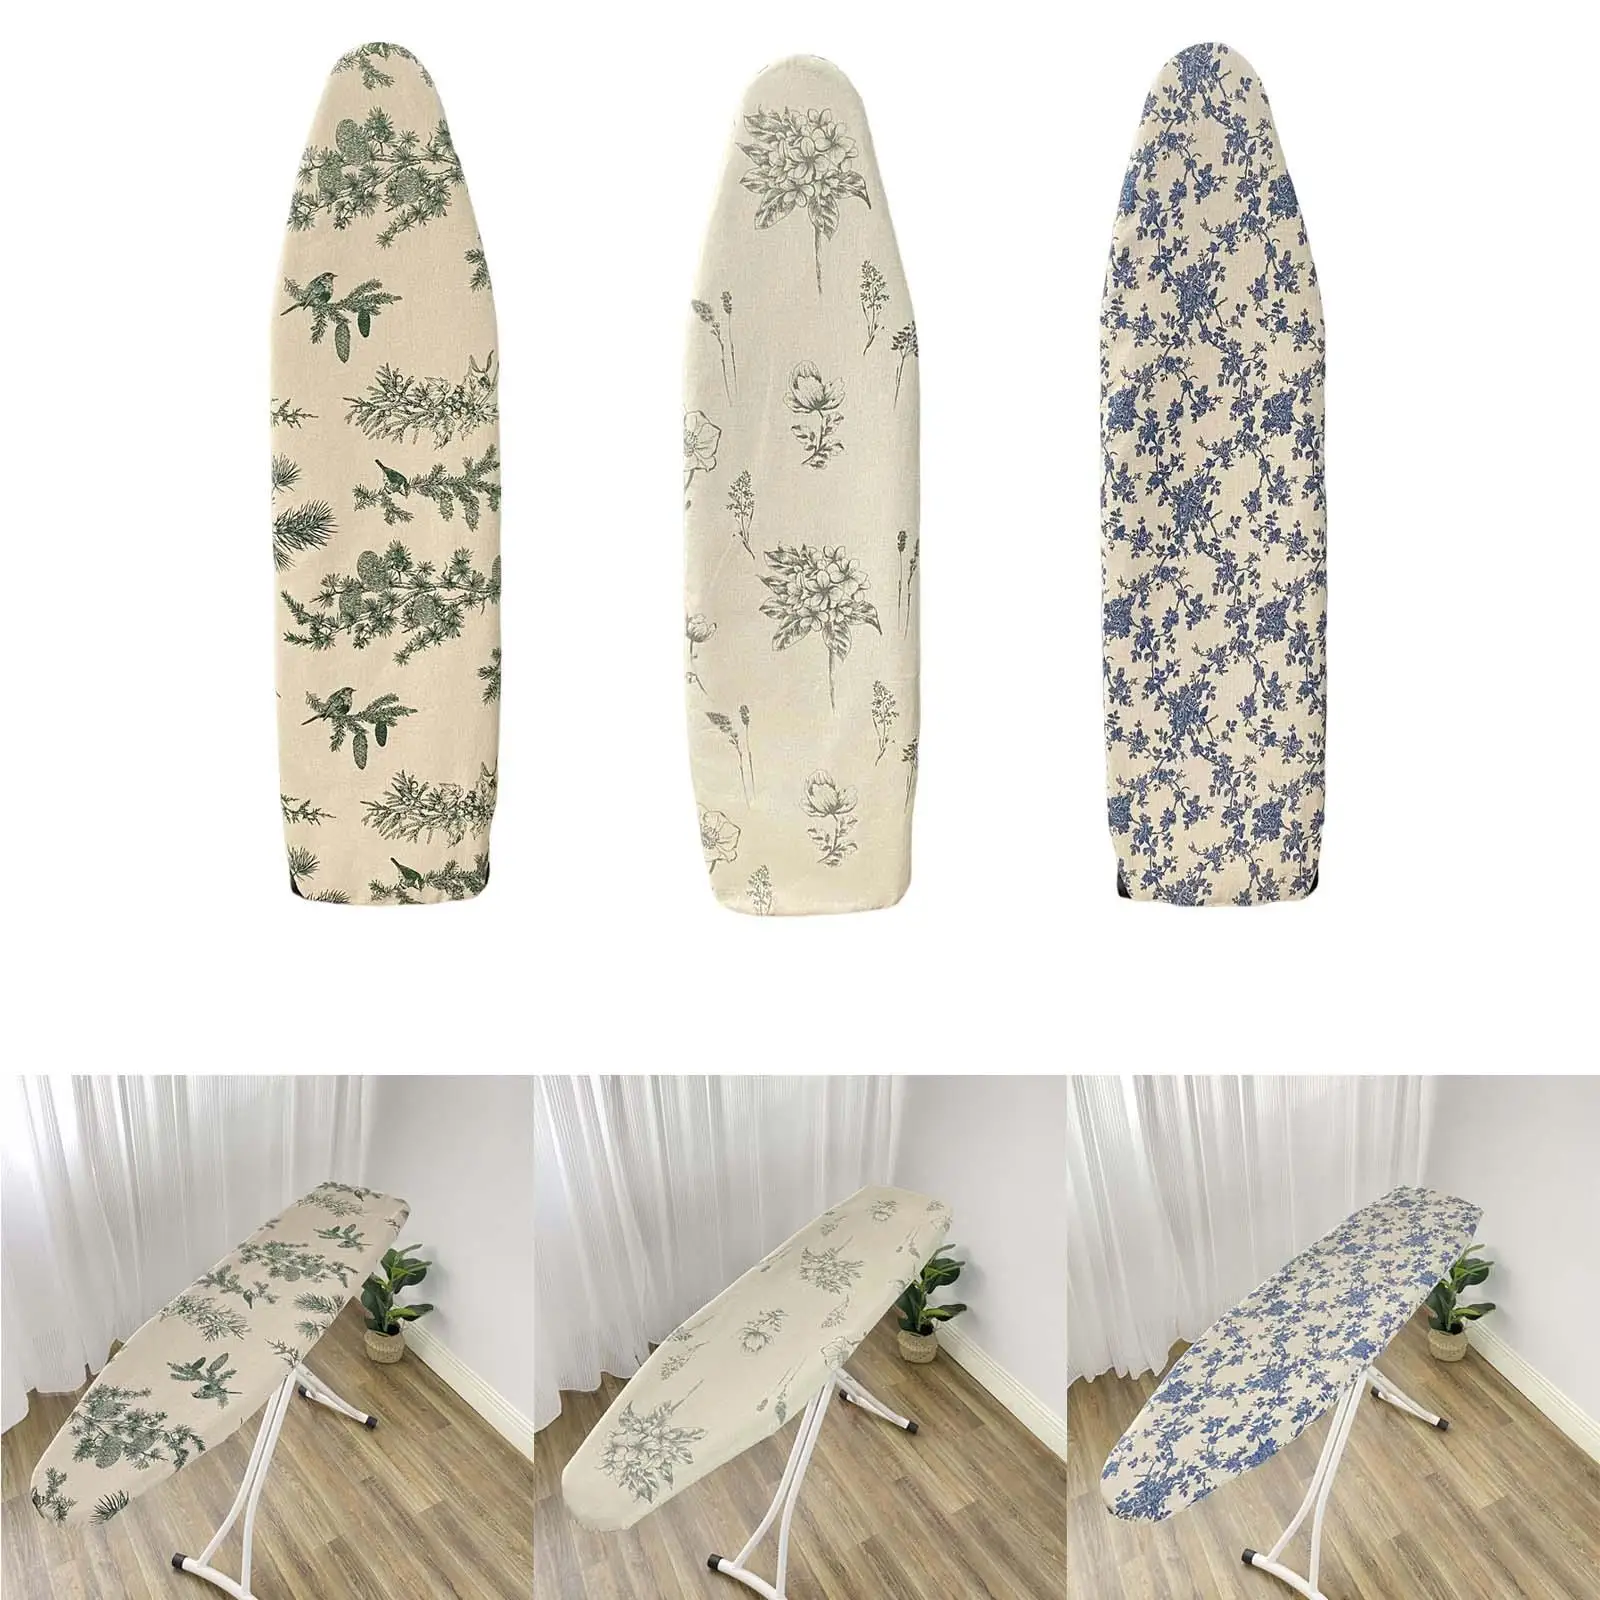 Ironing Table Cover Protector Easy to Install Foldable Durable Washable Reusable Ironing Board Cover for tools